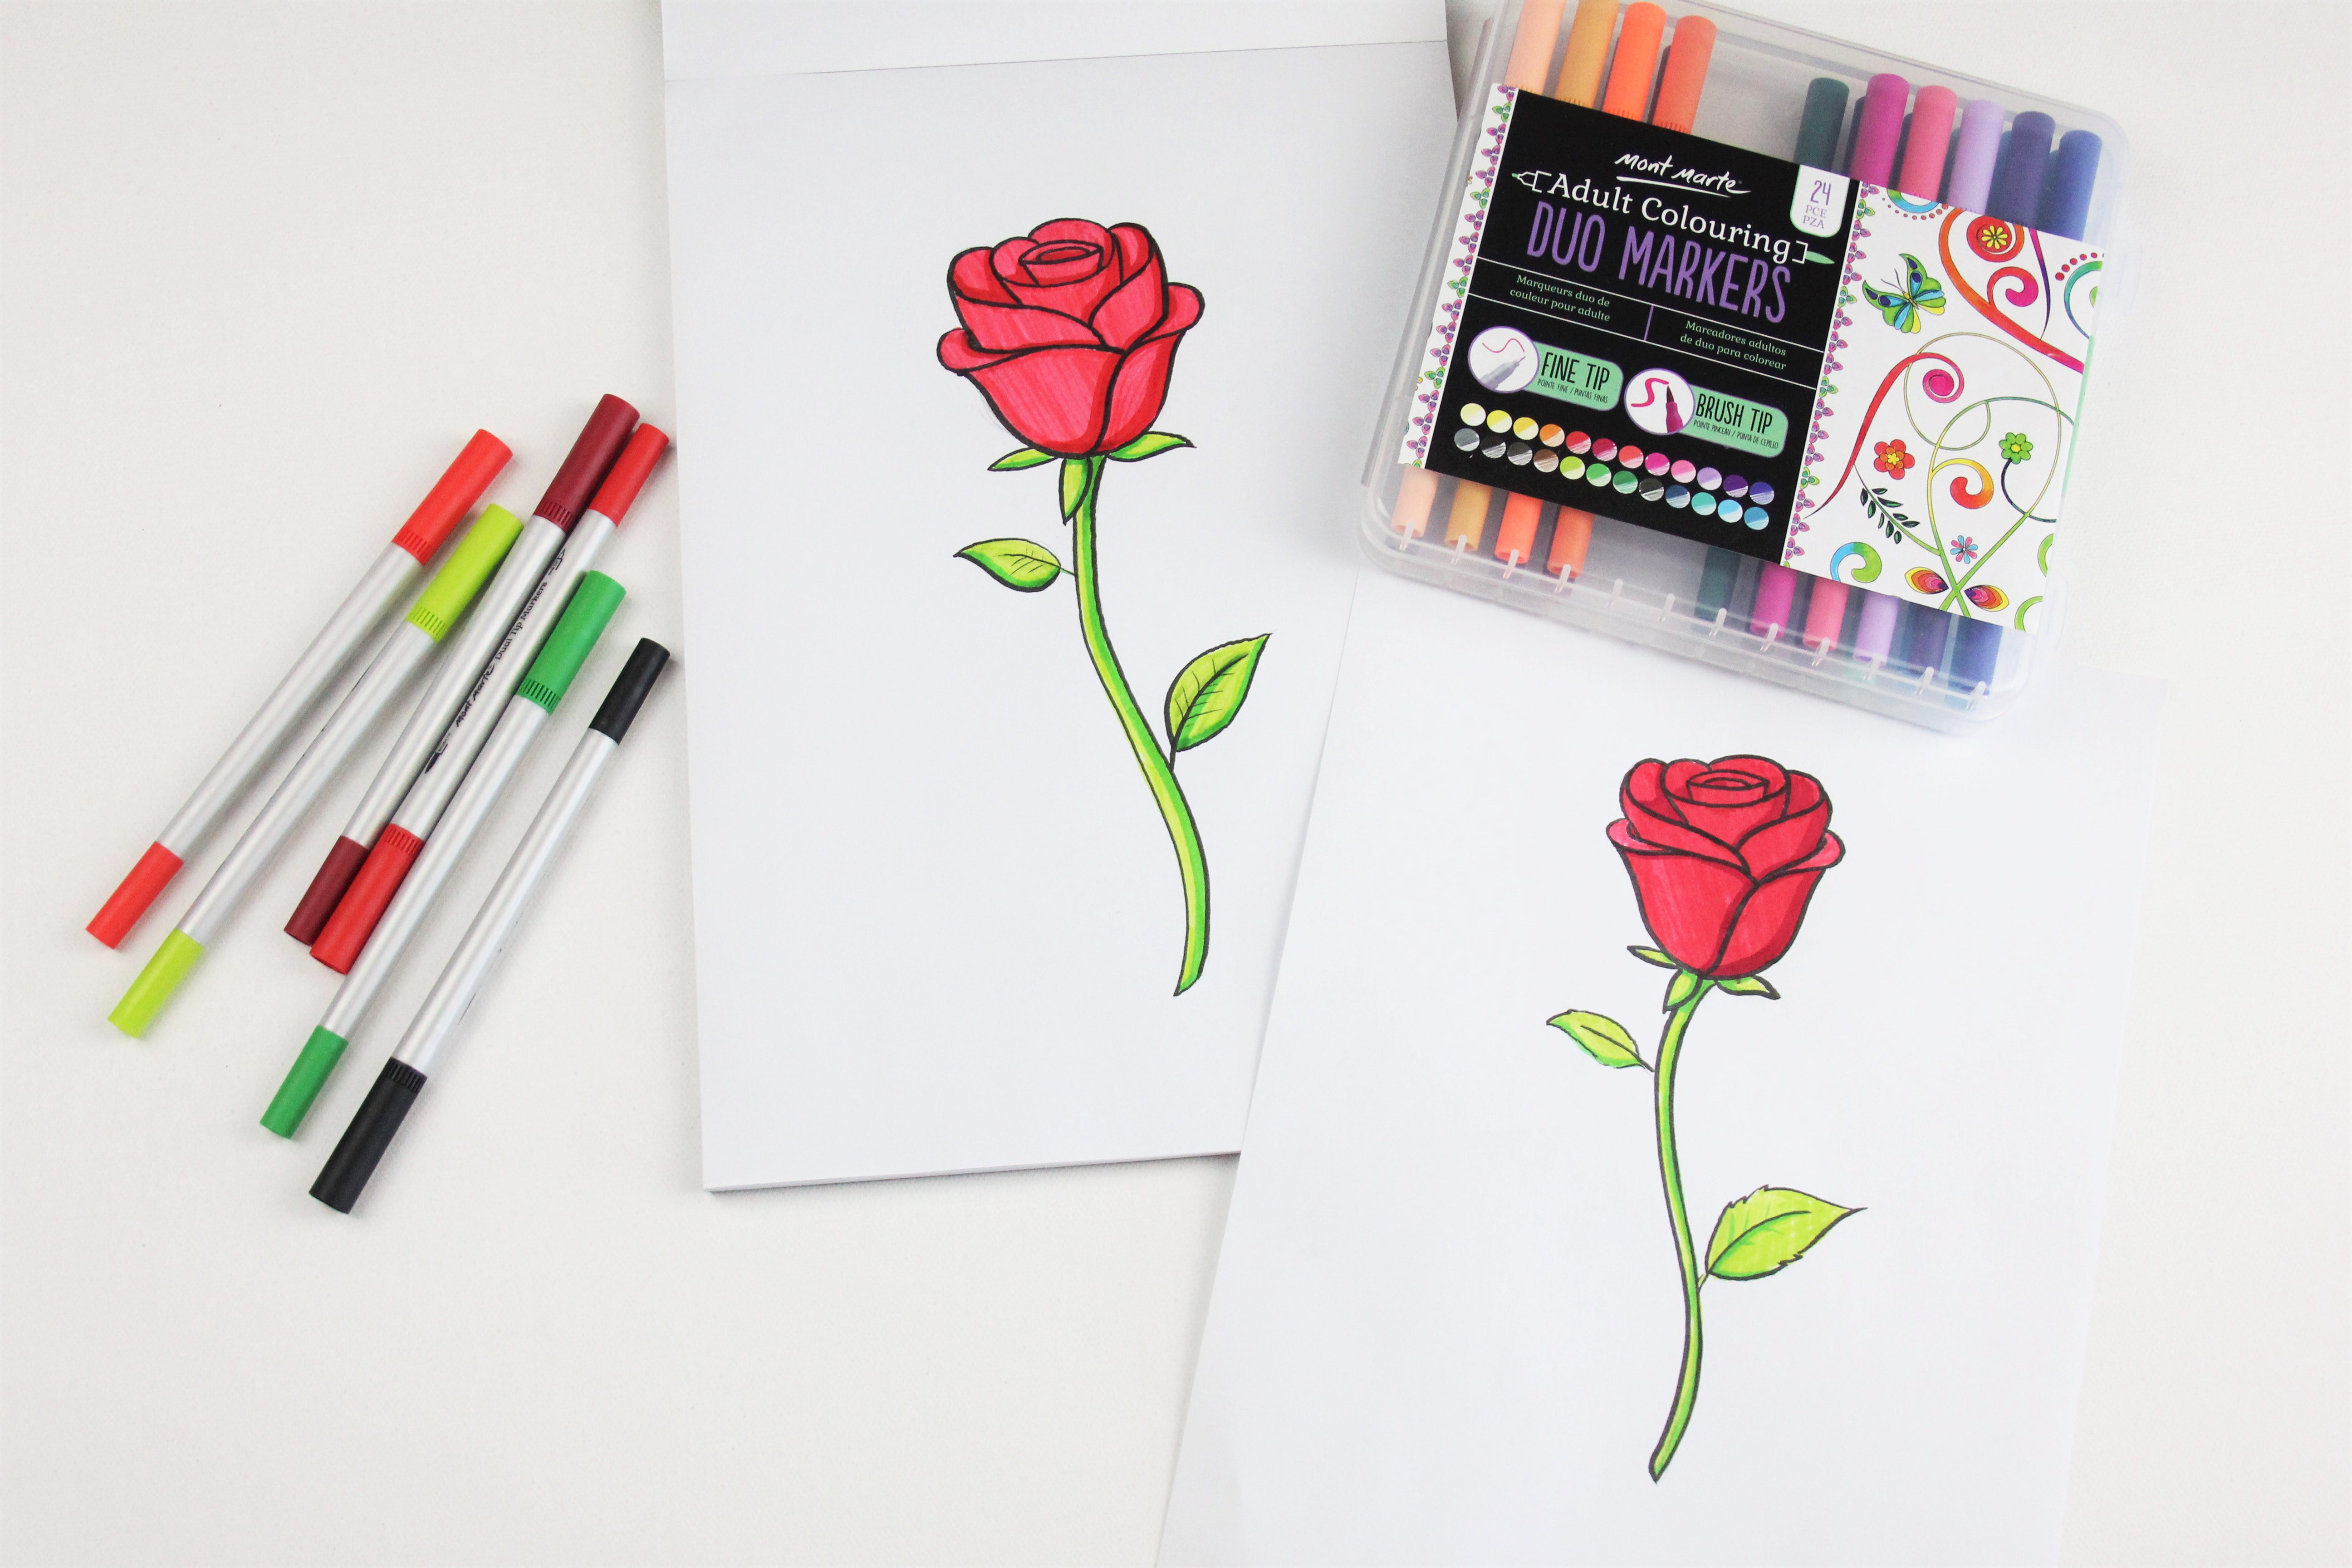 Two rose drawings in markers next to a pack of Mont Marte markers.